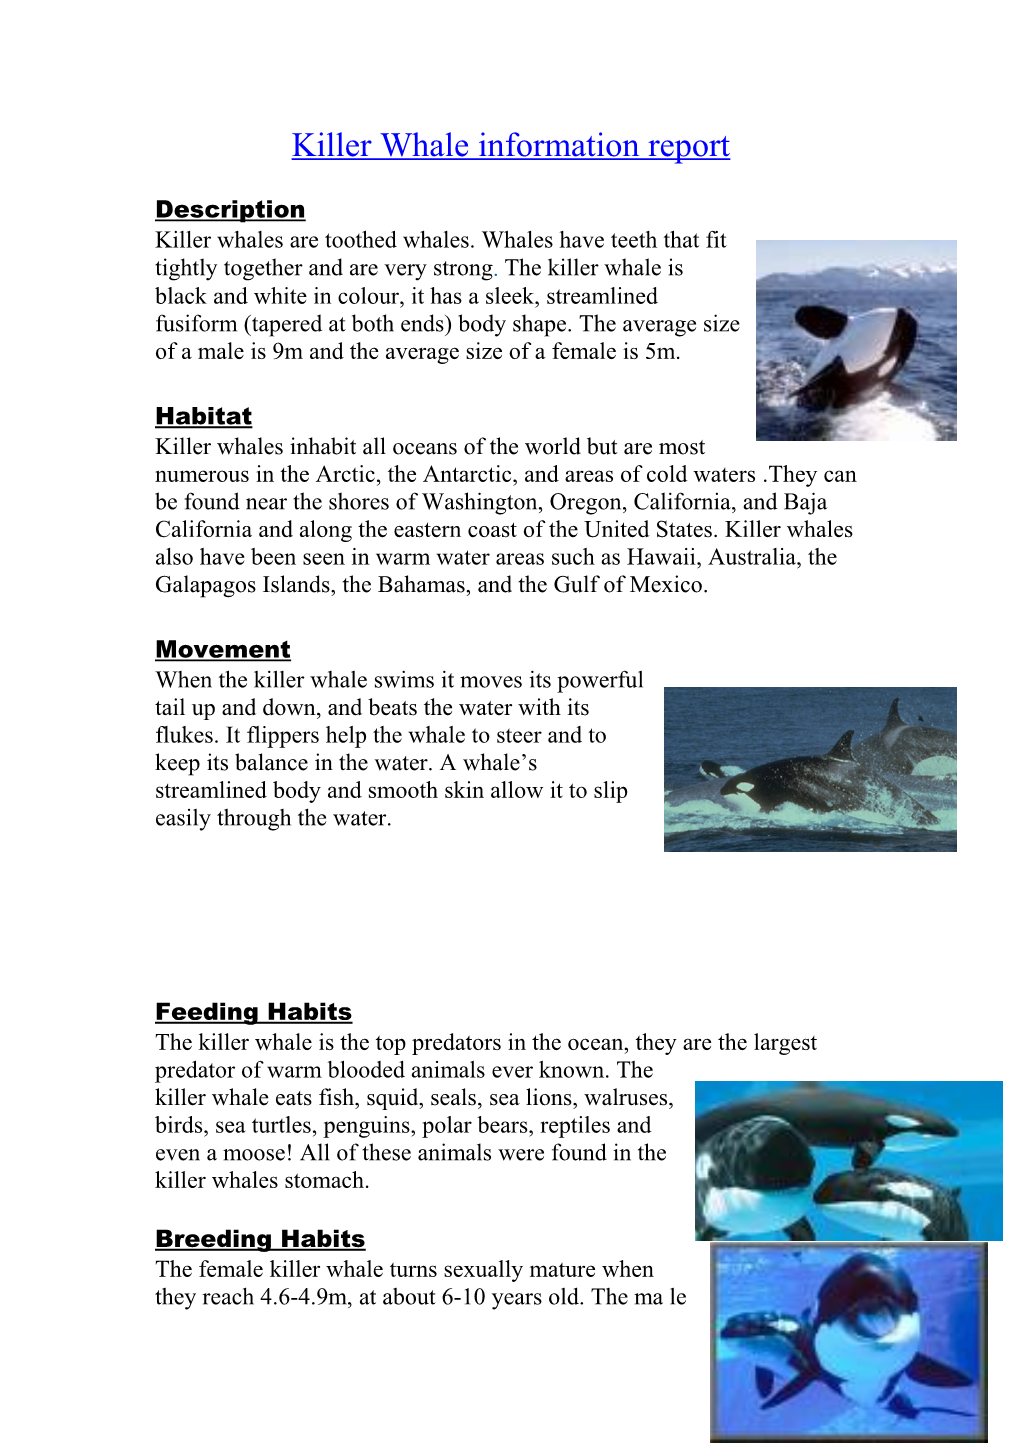 Killer Whale Information Report